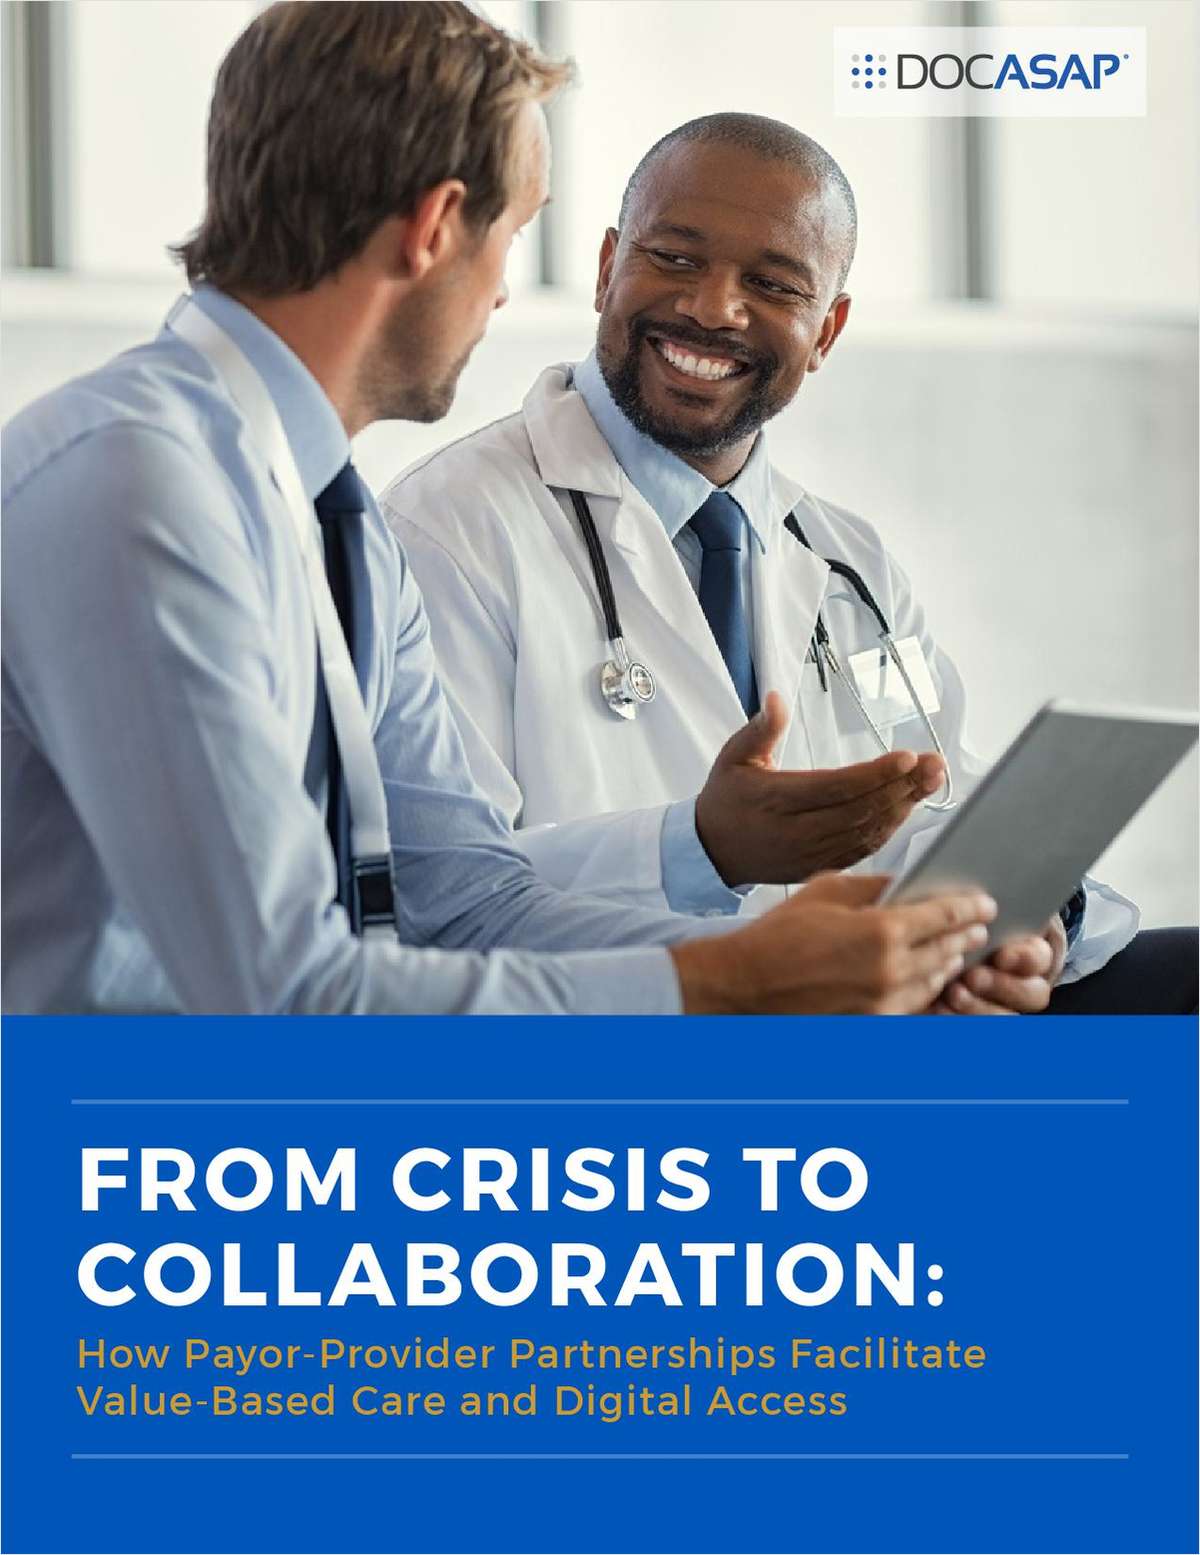 How Payor-Provider Partnerships Facilitate Value-Based Care and Digital Access